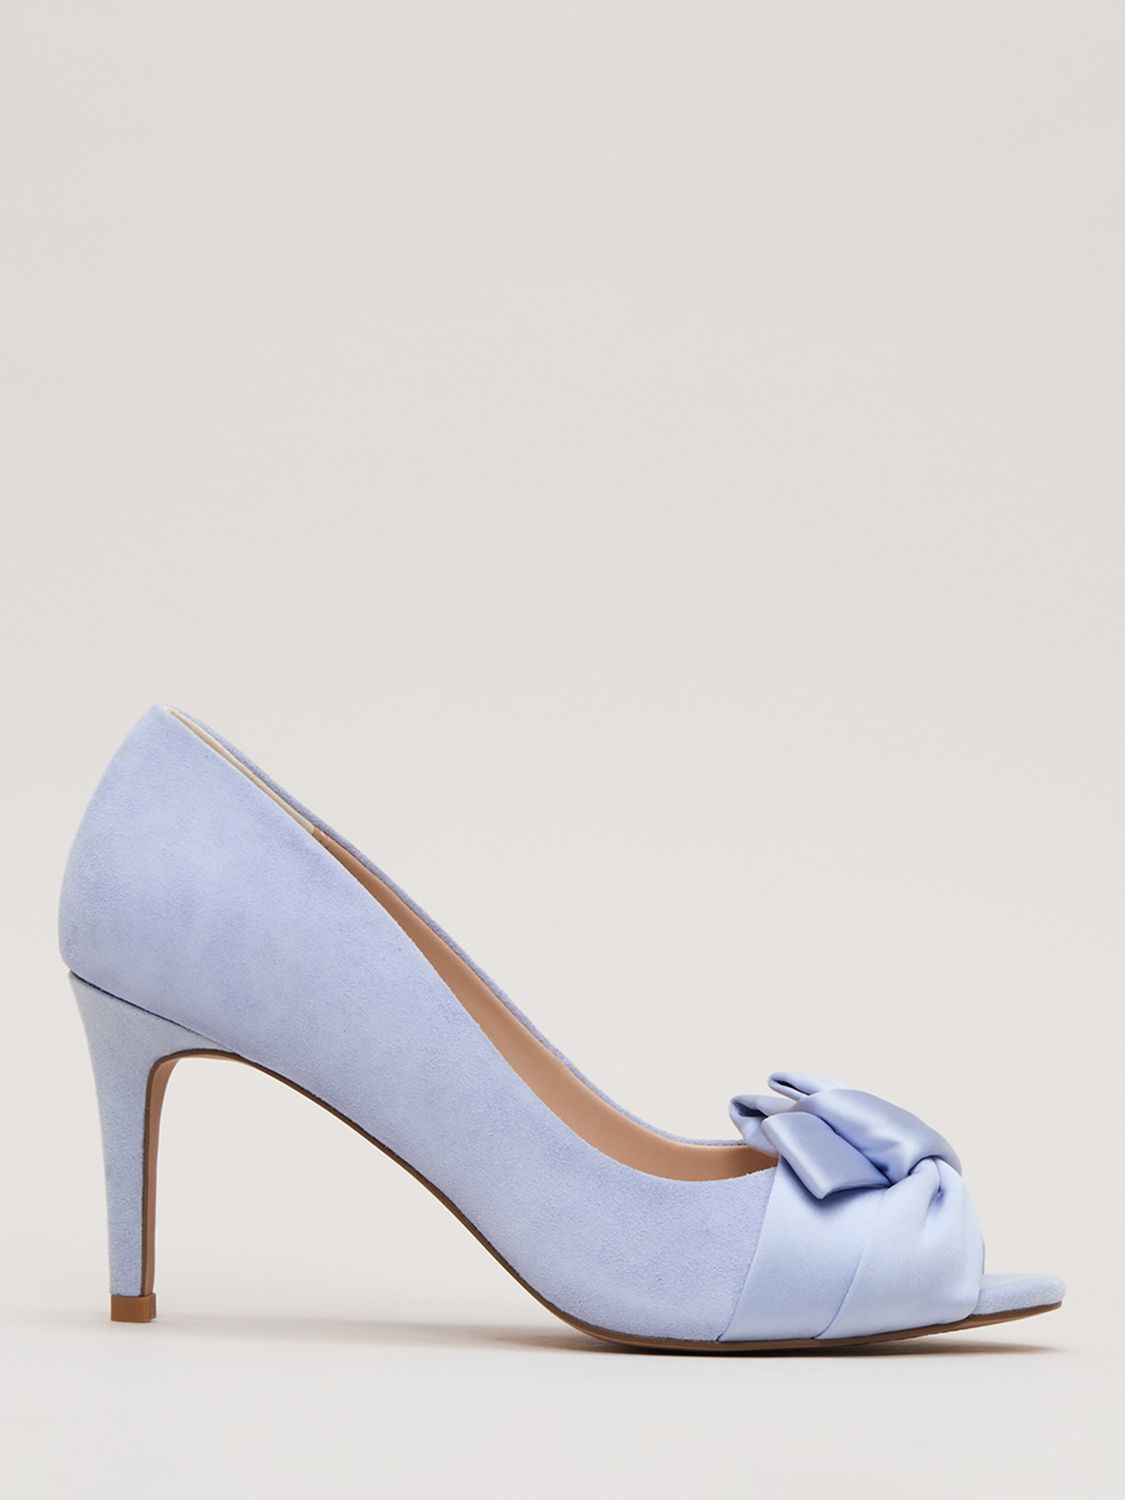 Phase Eight Knot Detail Peeptoe Shoes, Pale Blue at John Lewis & Partners